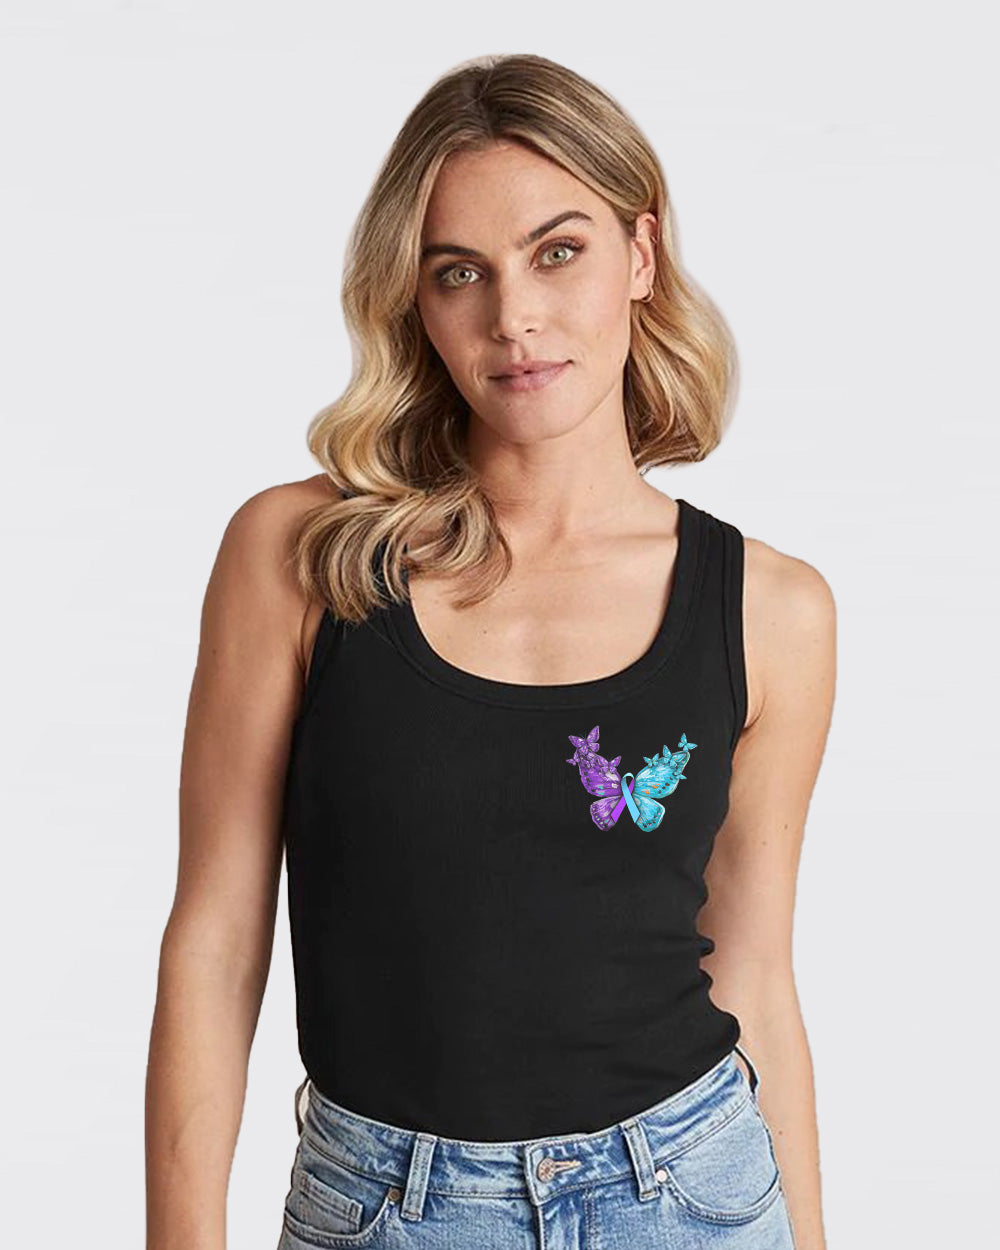 No Story Should End Too Soon Butterfly Women's Suicide Prevention Awareness Tanks